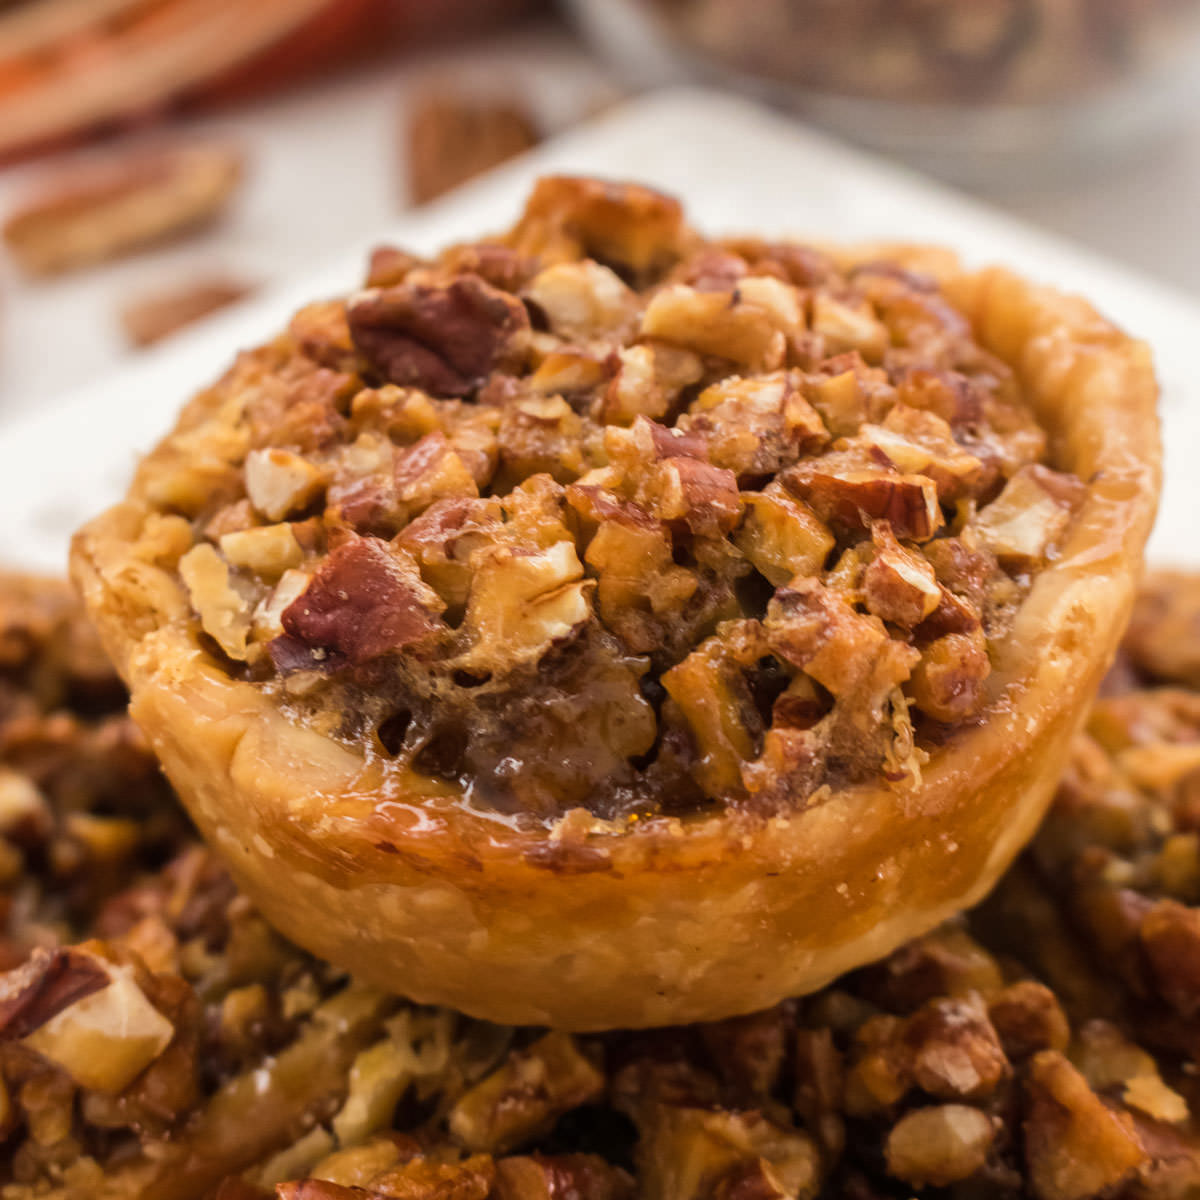 Closeup on a Mini Pecan Pie sitting on a stack of other pies on a white plate.